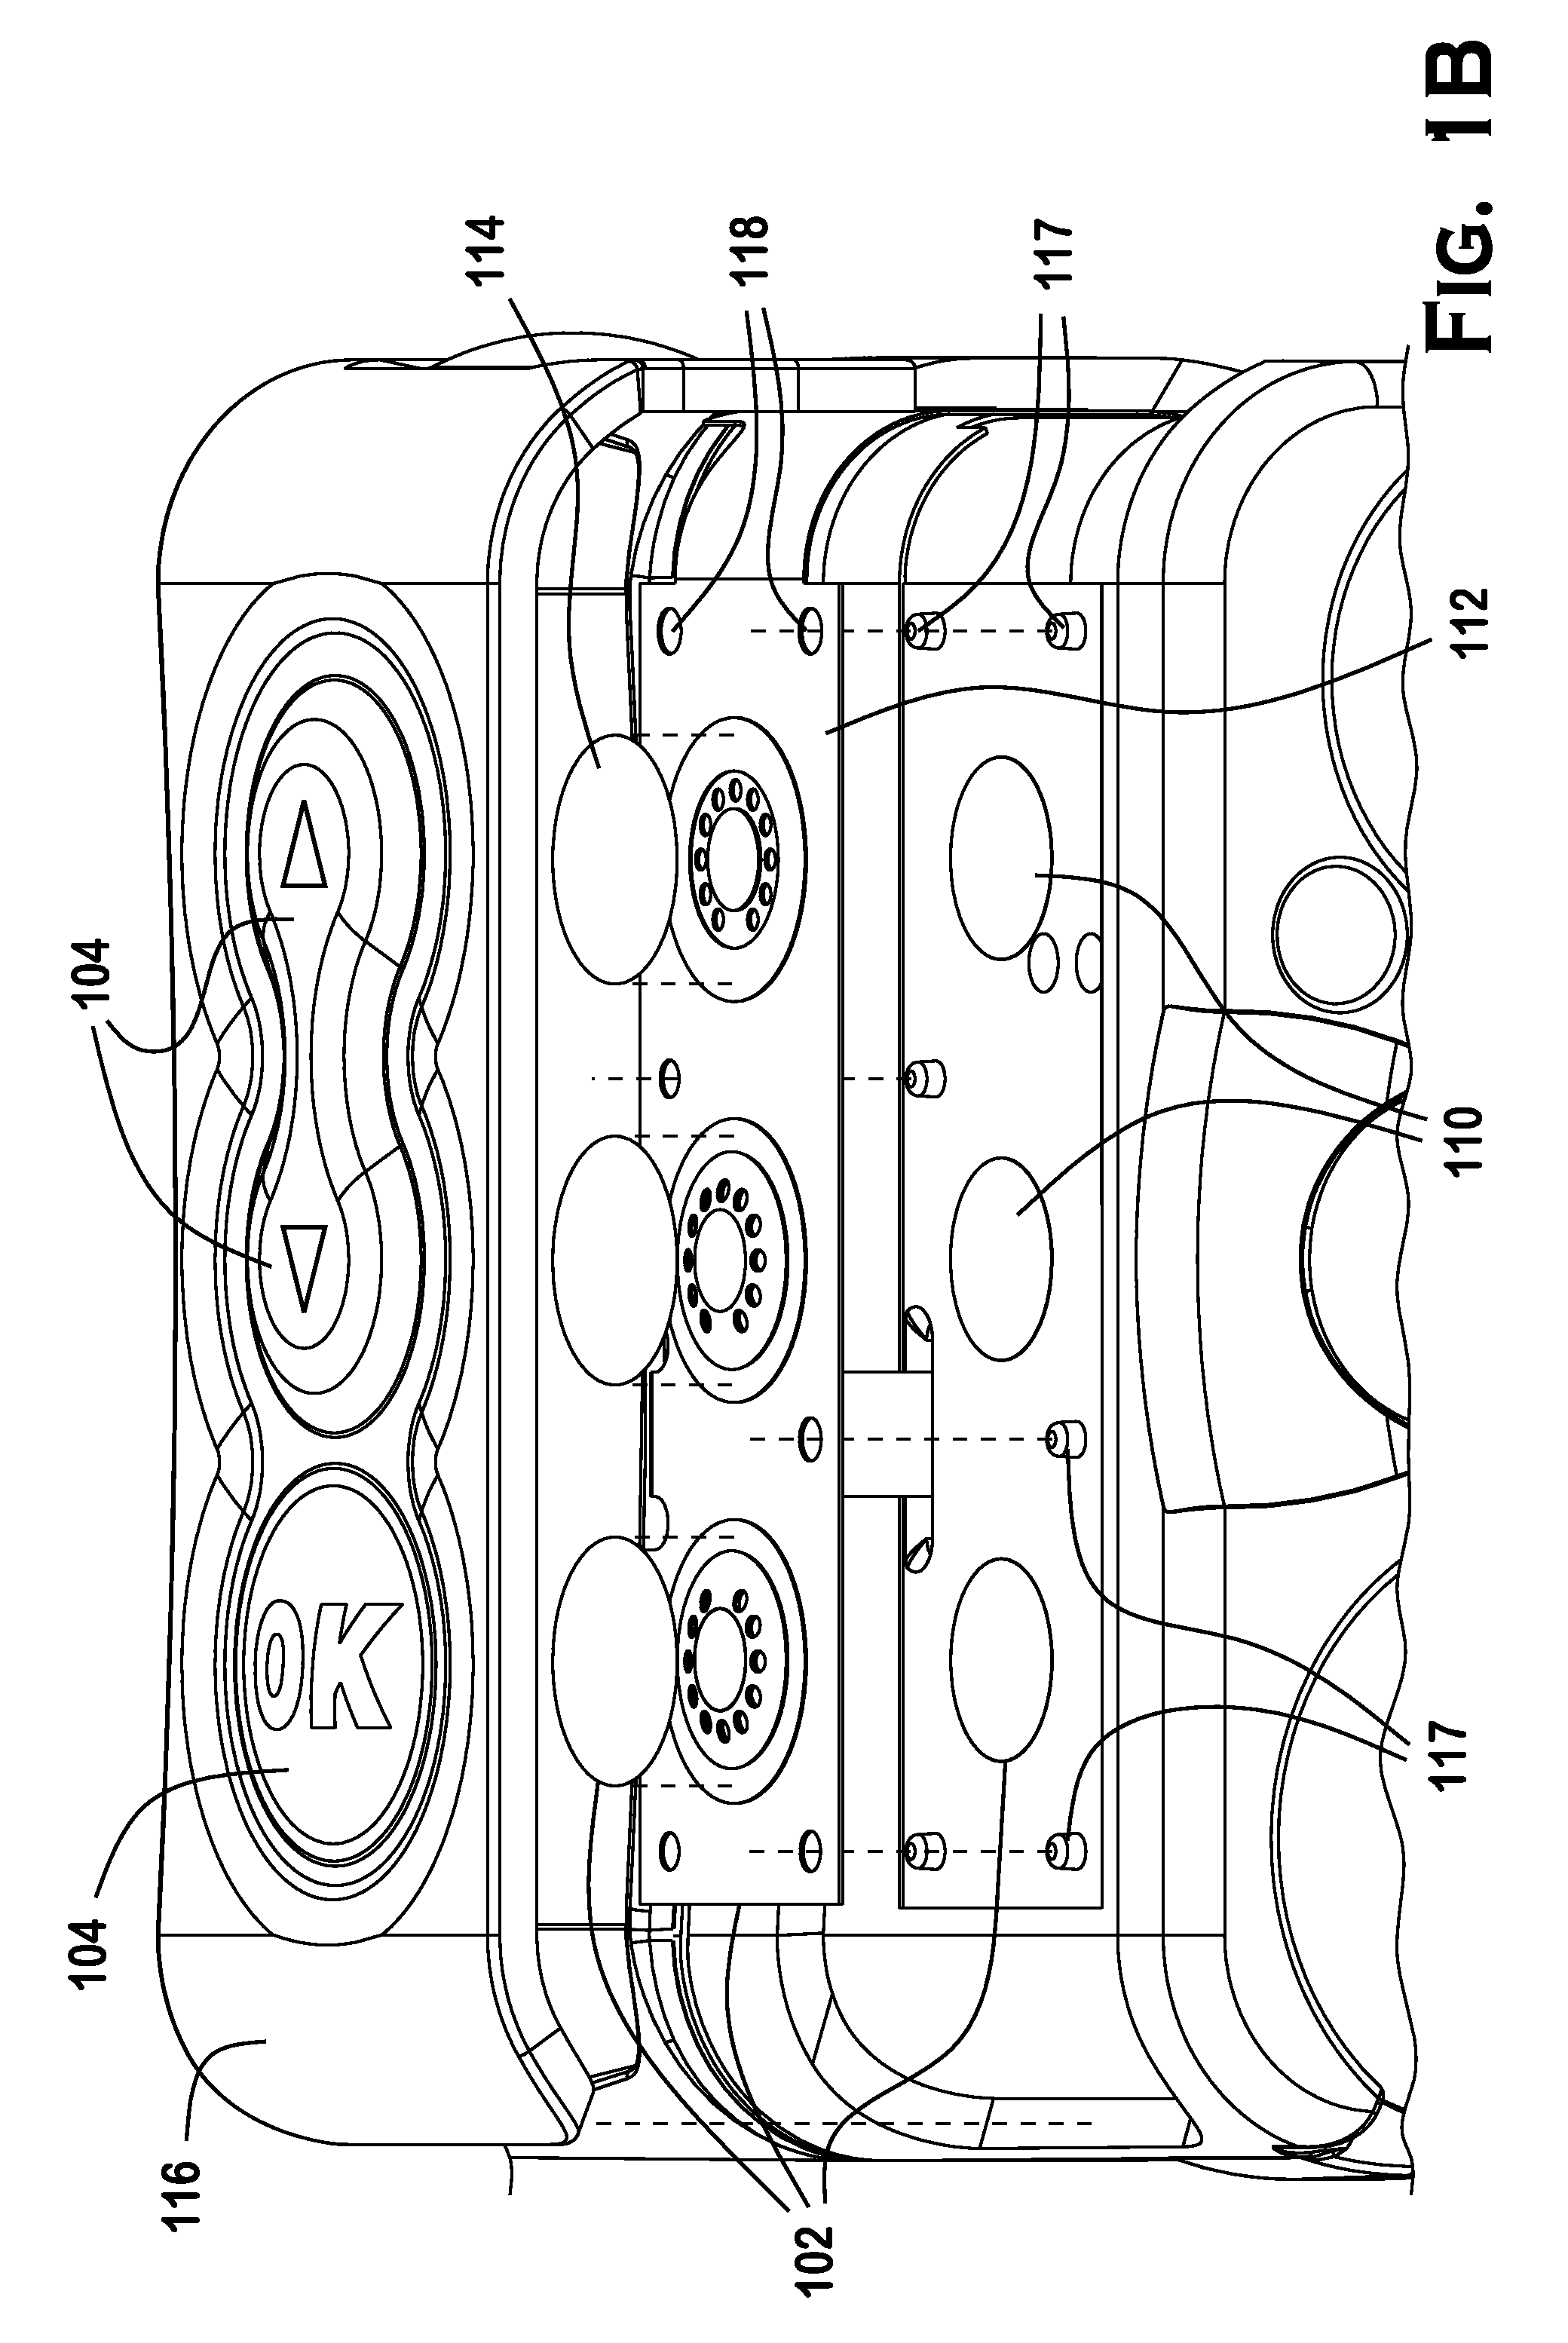 Over-molded keypad and method of manufacture